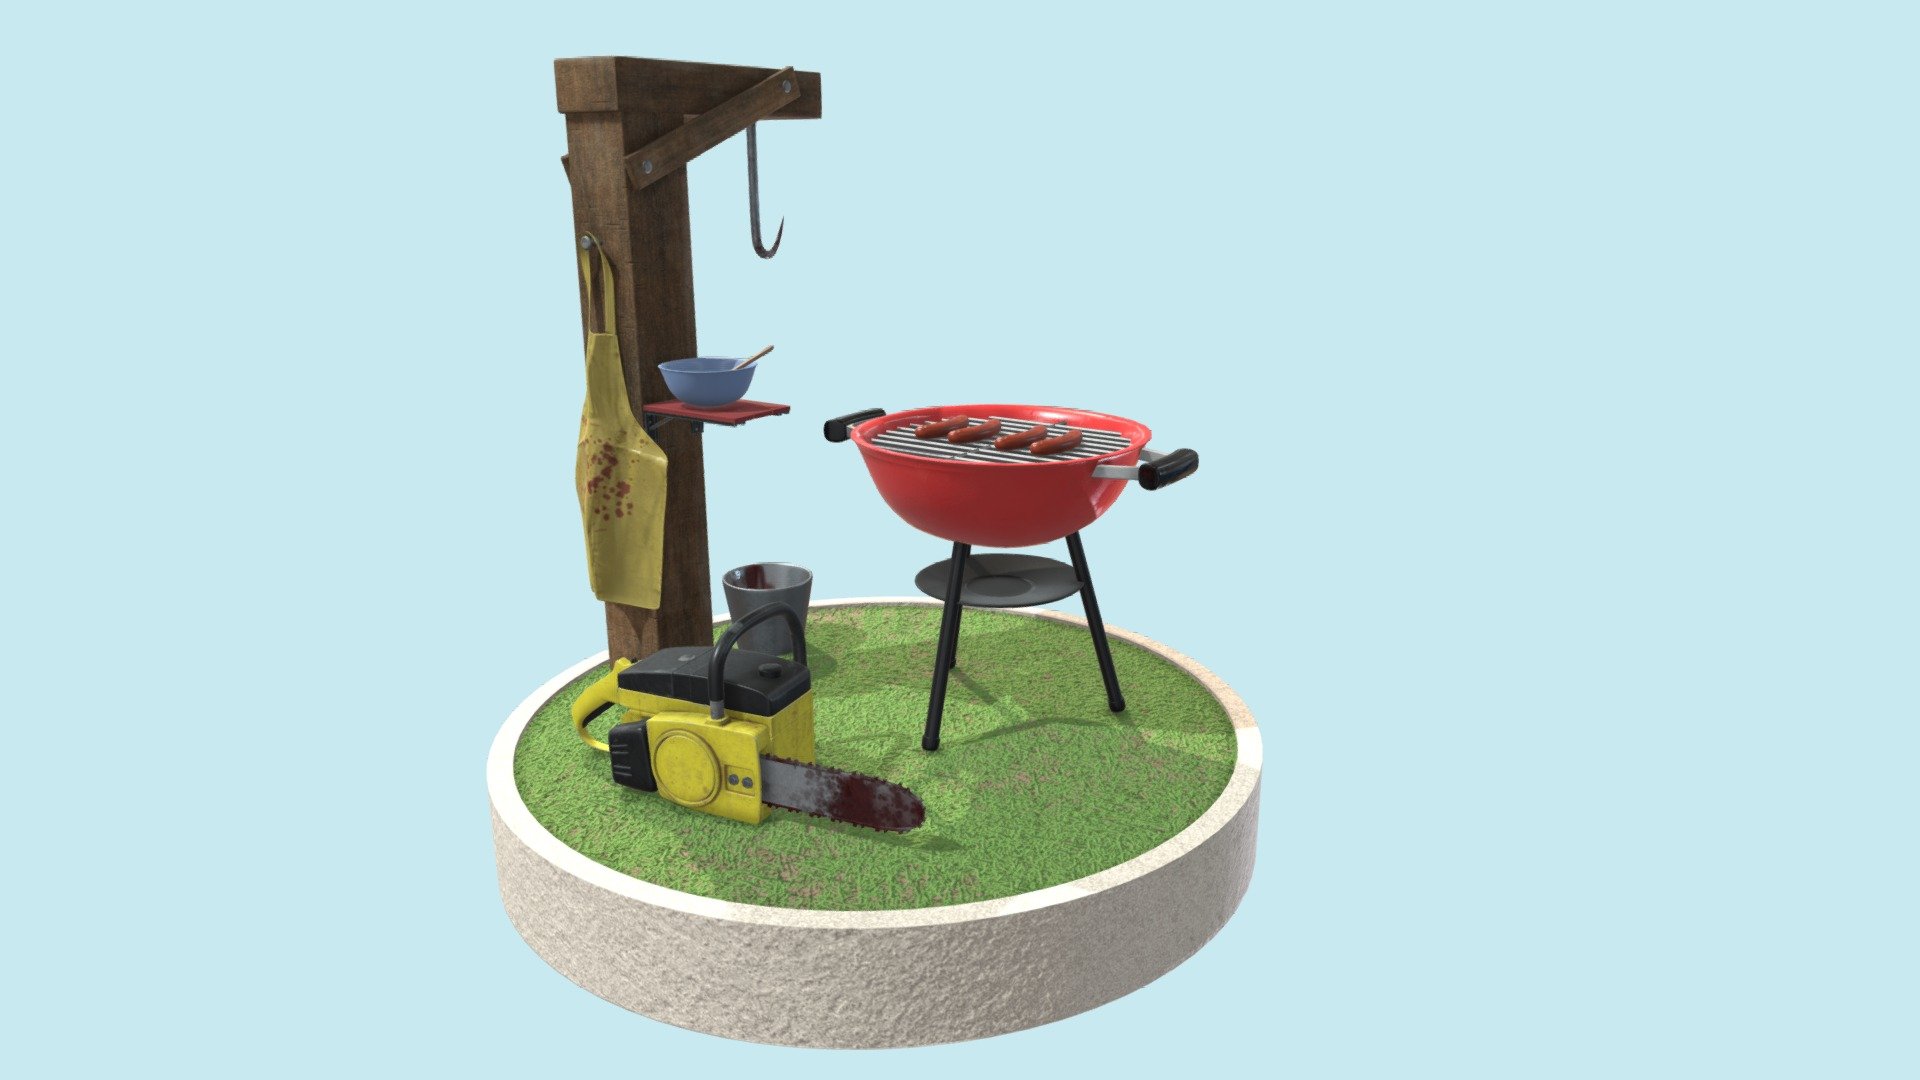 Inspired by the Texas Chainsaw Massacre and Dead by Daylight

Originally made for the Sketchfab Weekly &ldquo;Barbecue